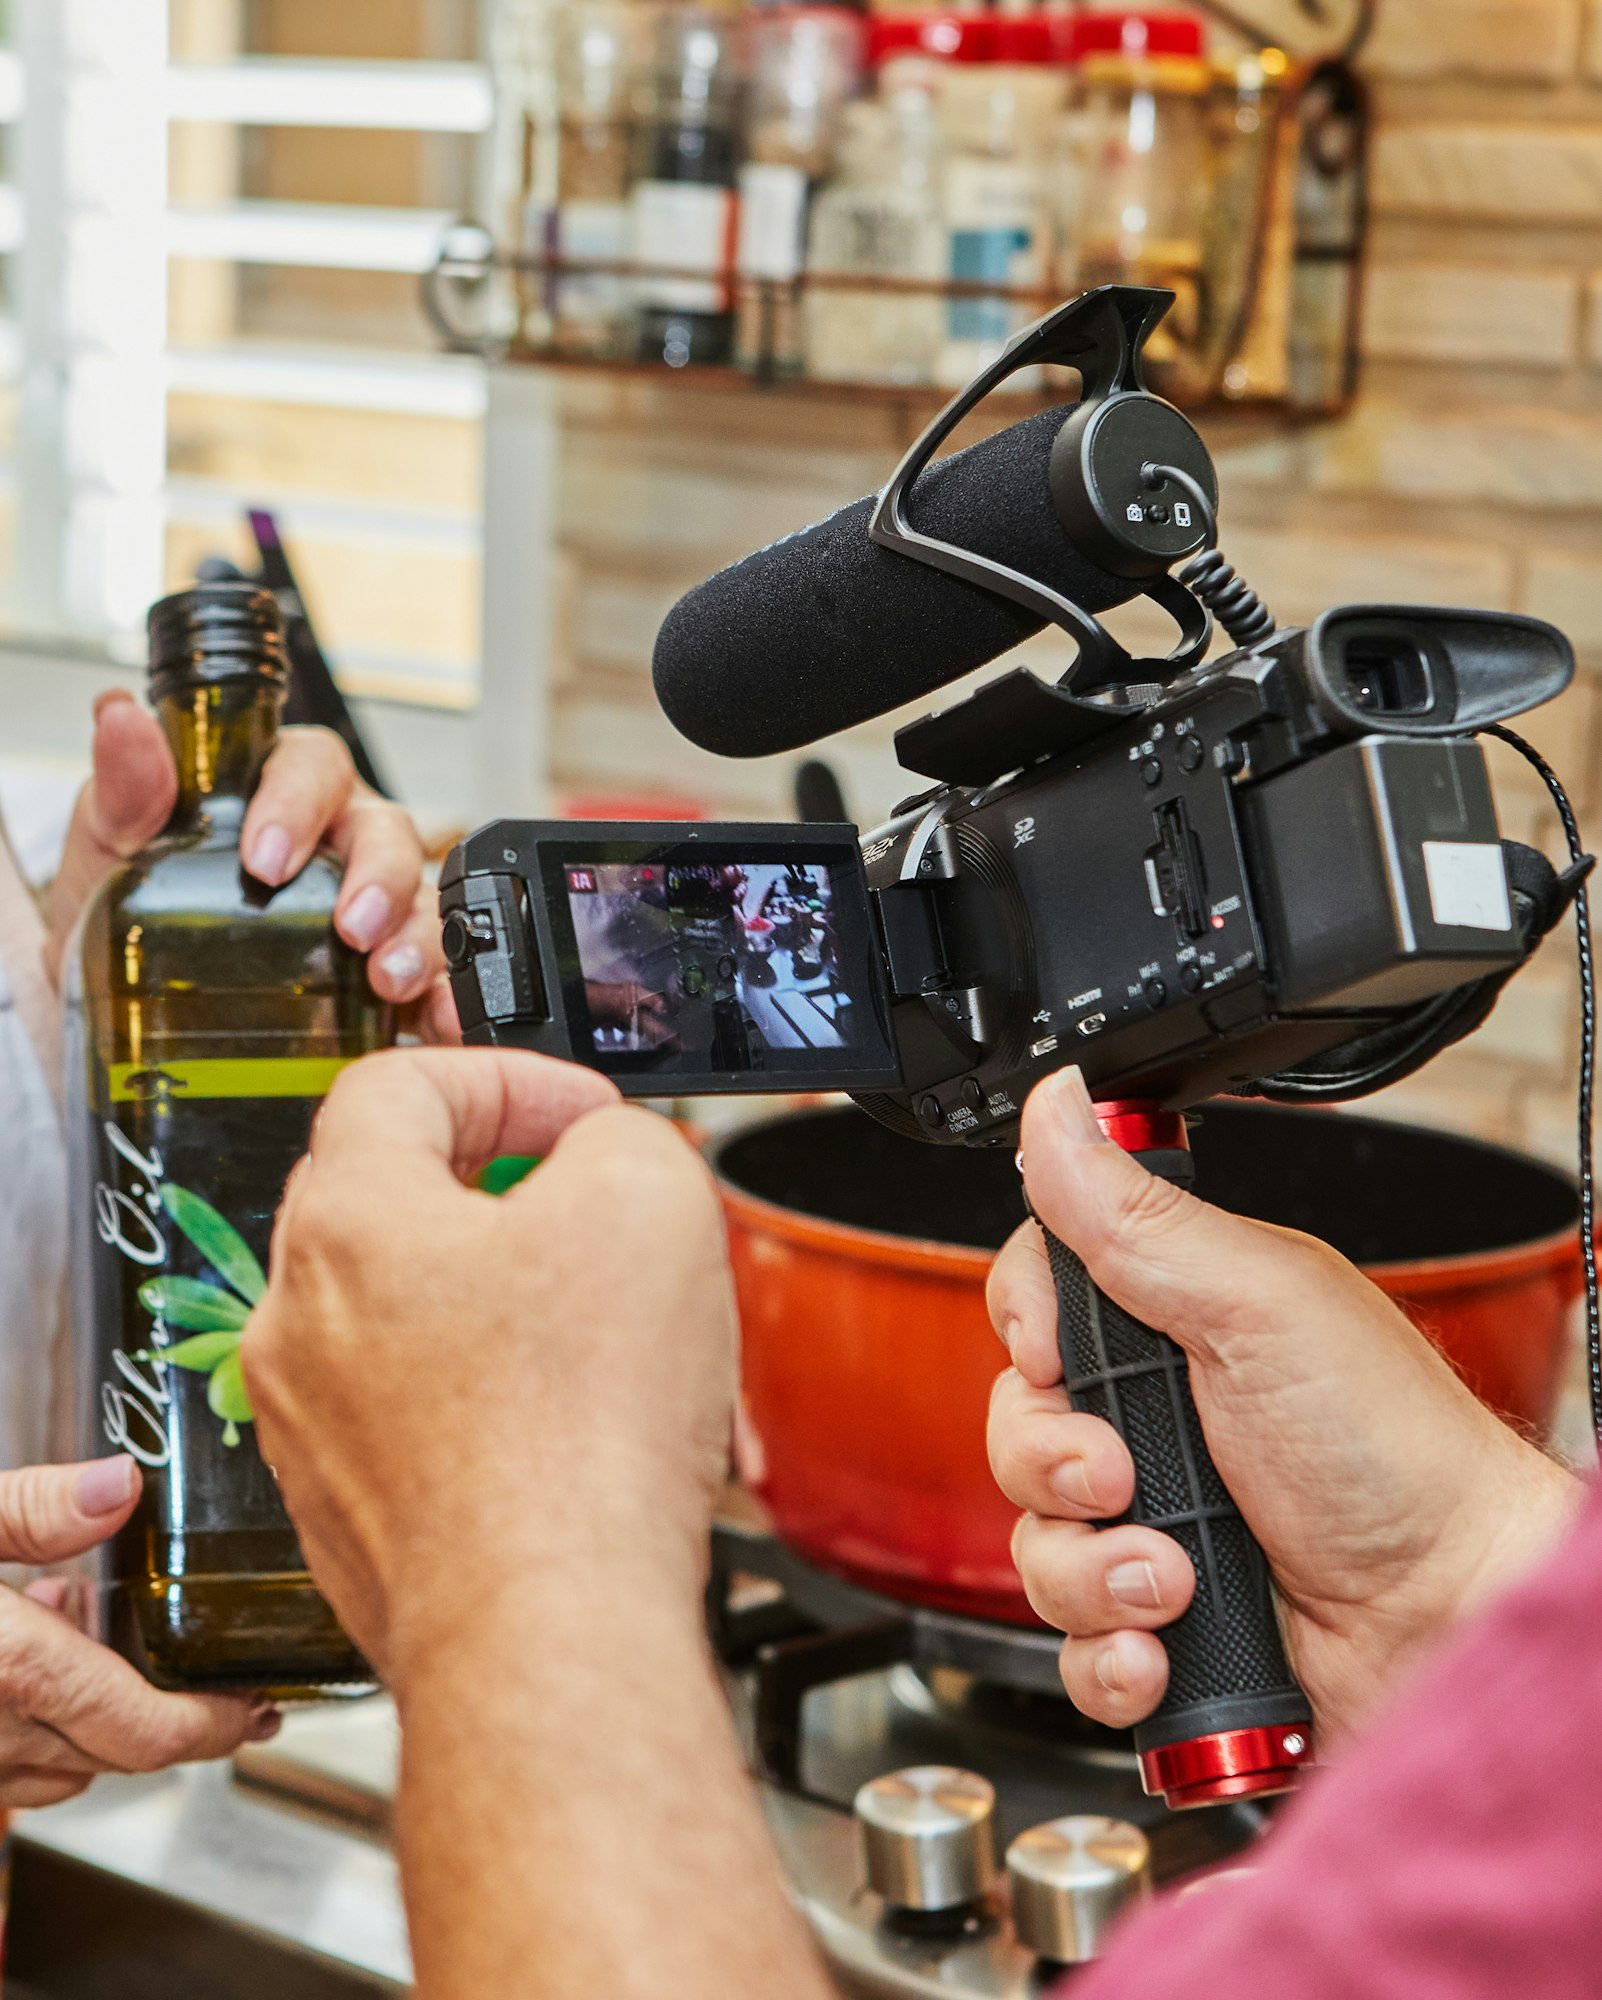 They are filming video of cooking, bottle of olive oil in the hands of the cook